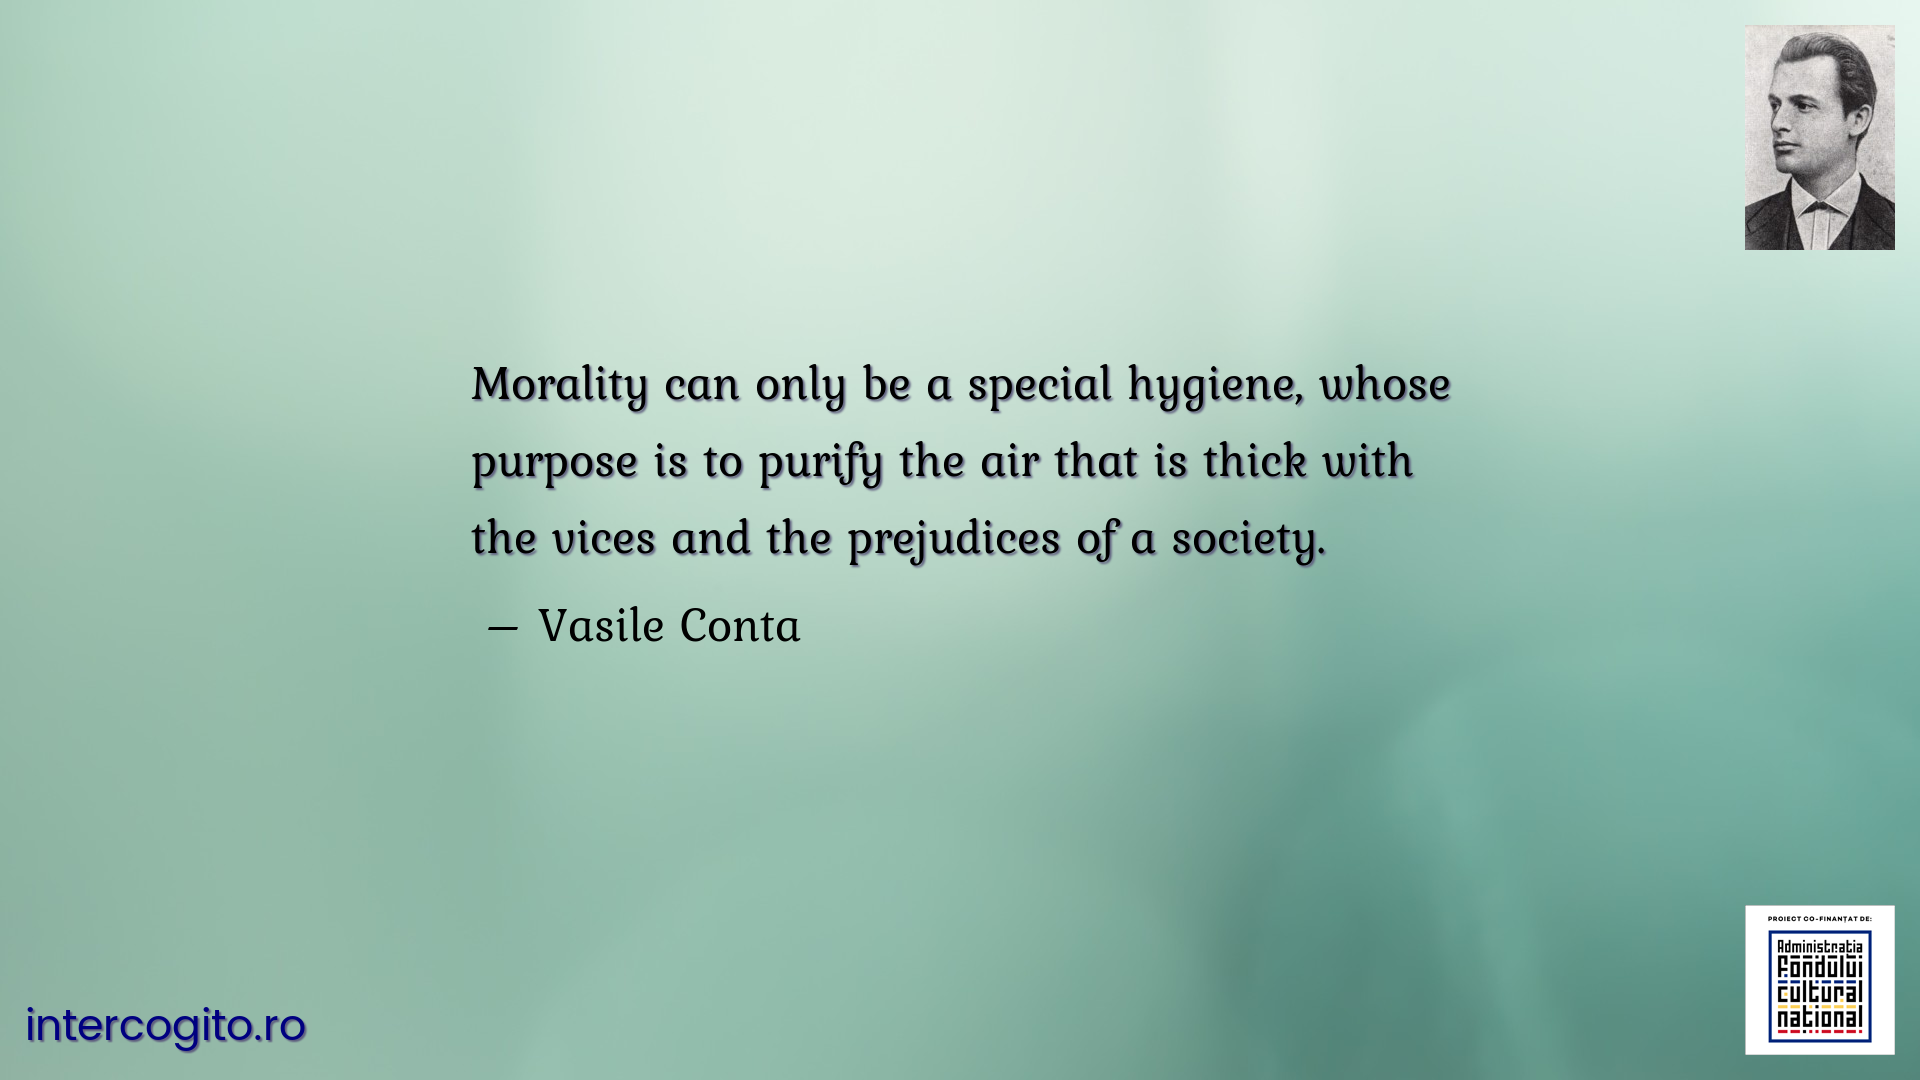 Morality can only be a special hygiene, whose purpose is to purify the air that is thick with the vices and the prejudices of a society.